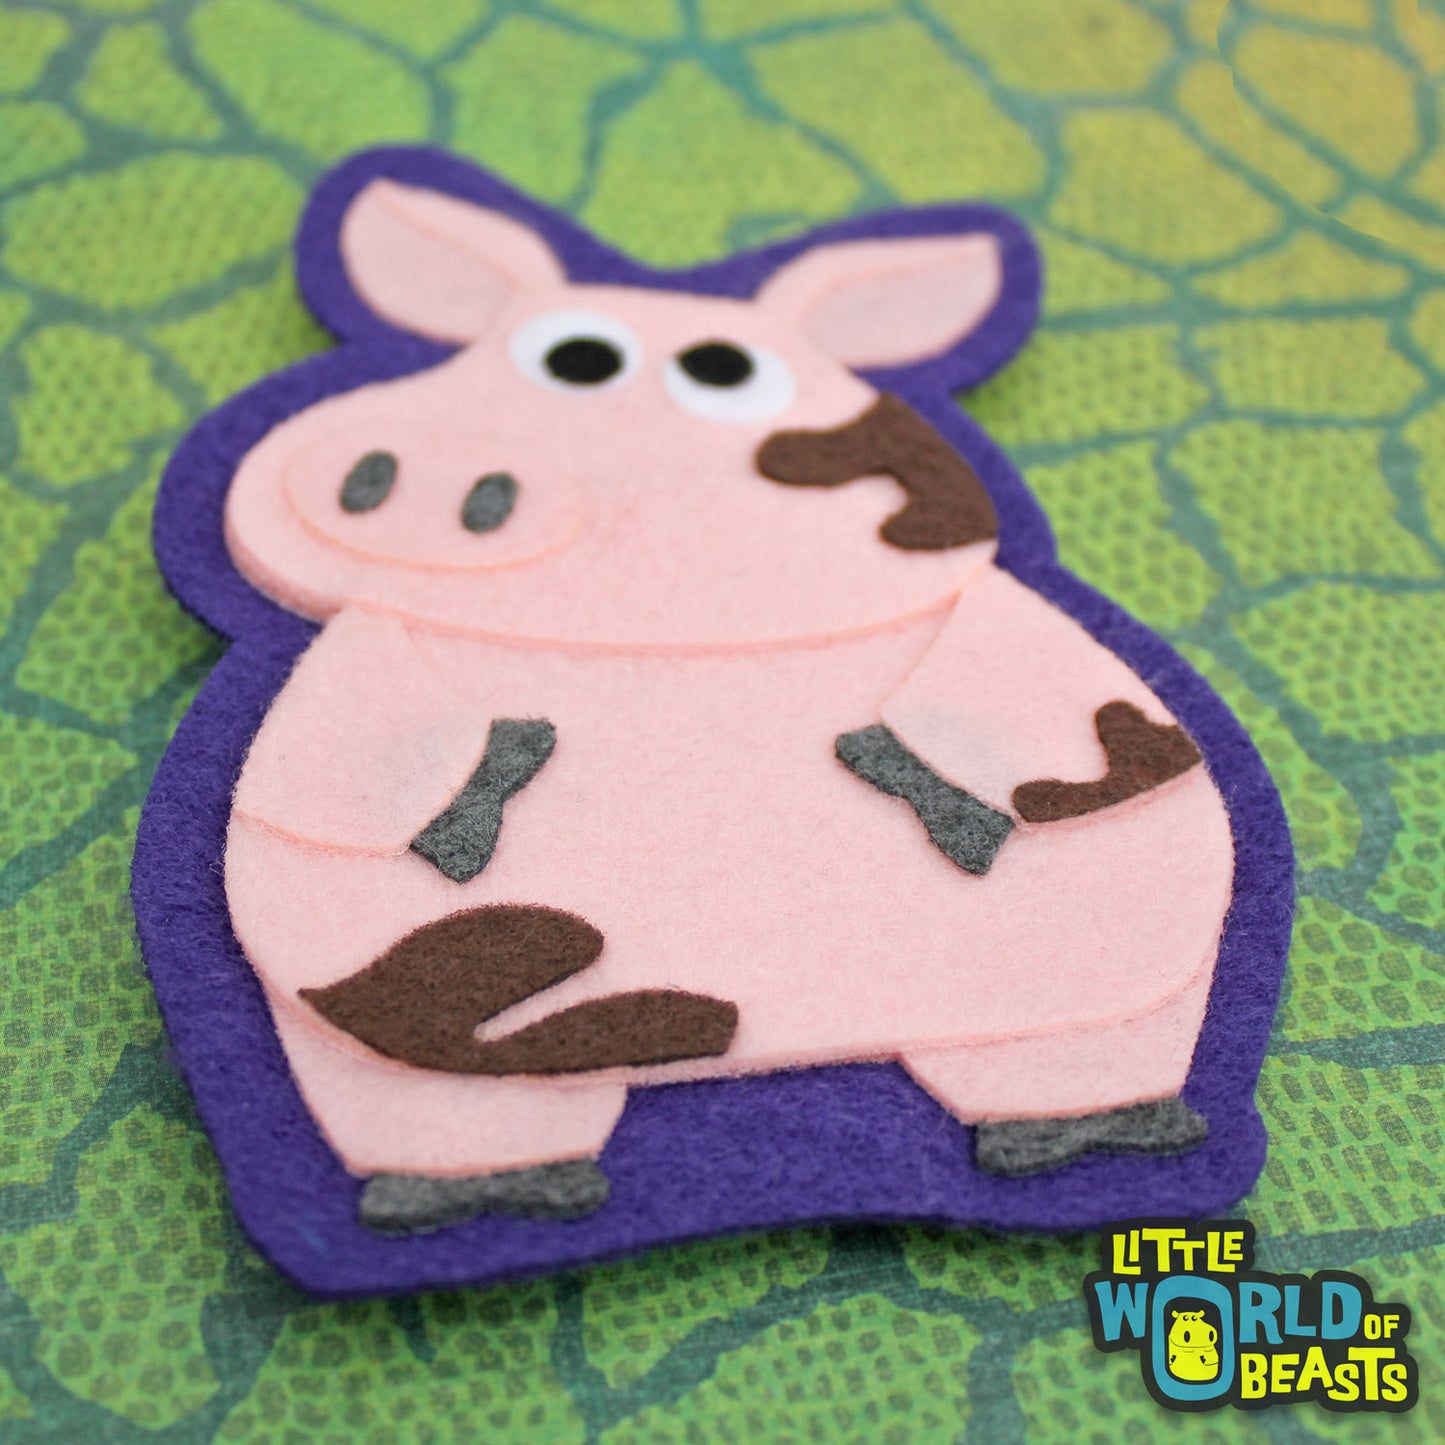 Sir Francis the Pig - Iron On or Sew On Patch - Little World of Beasts